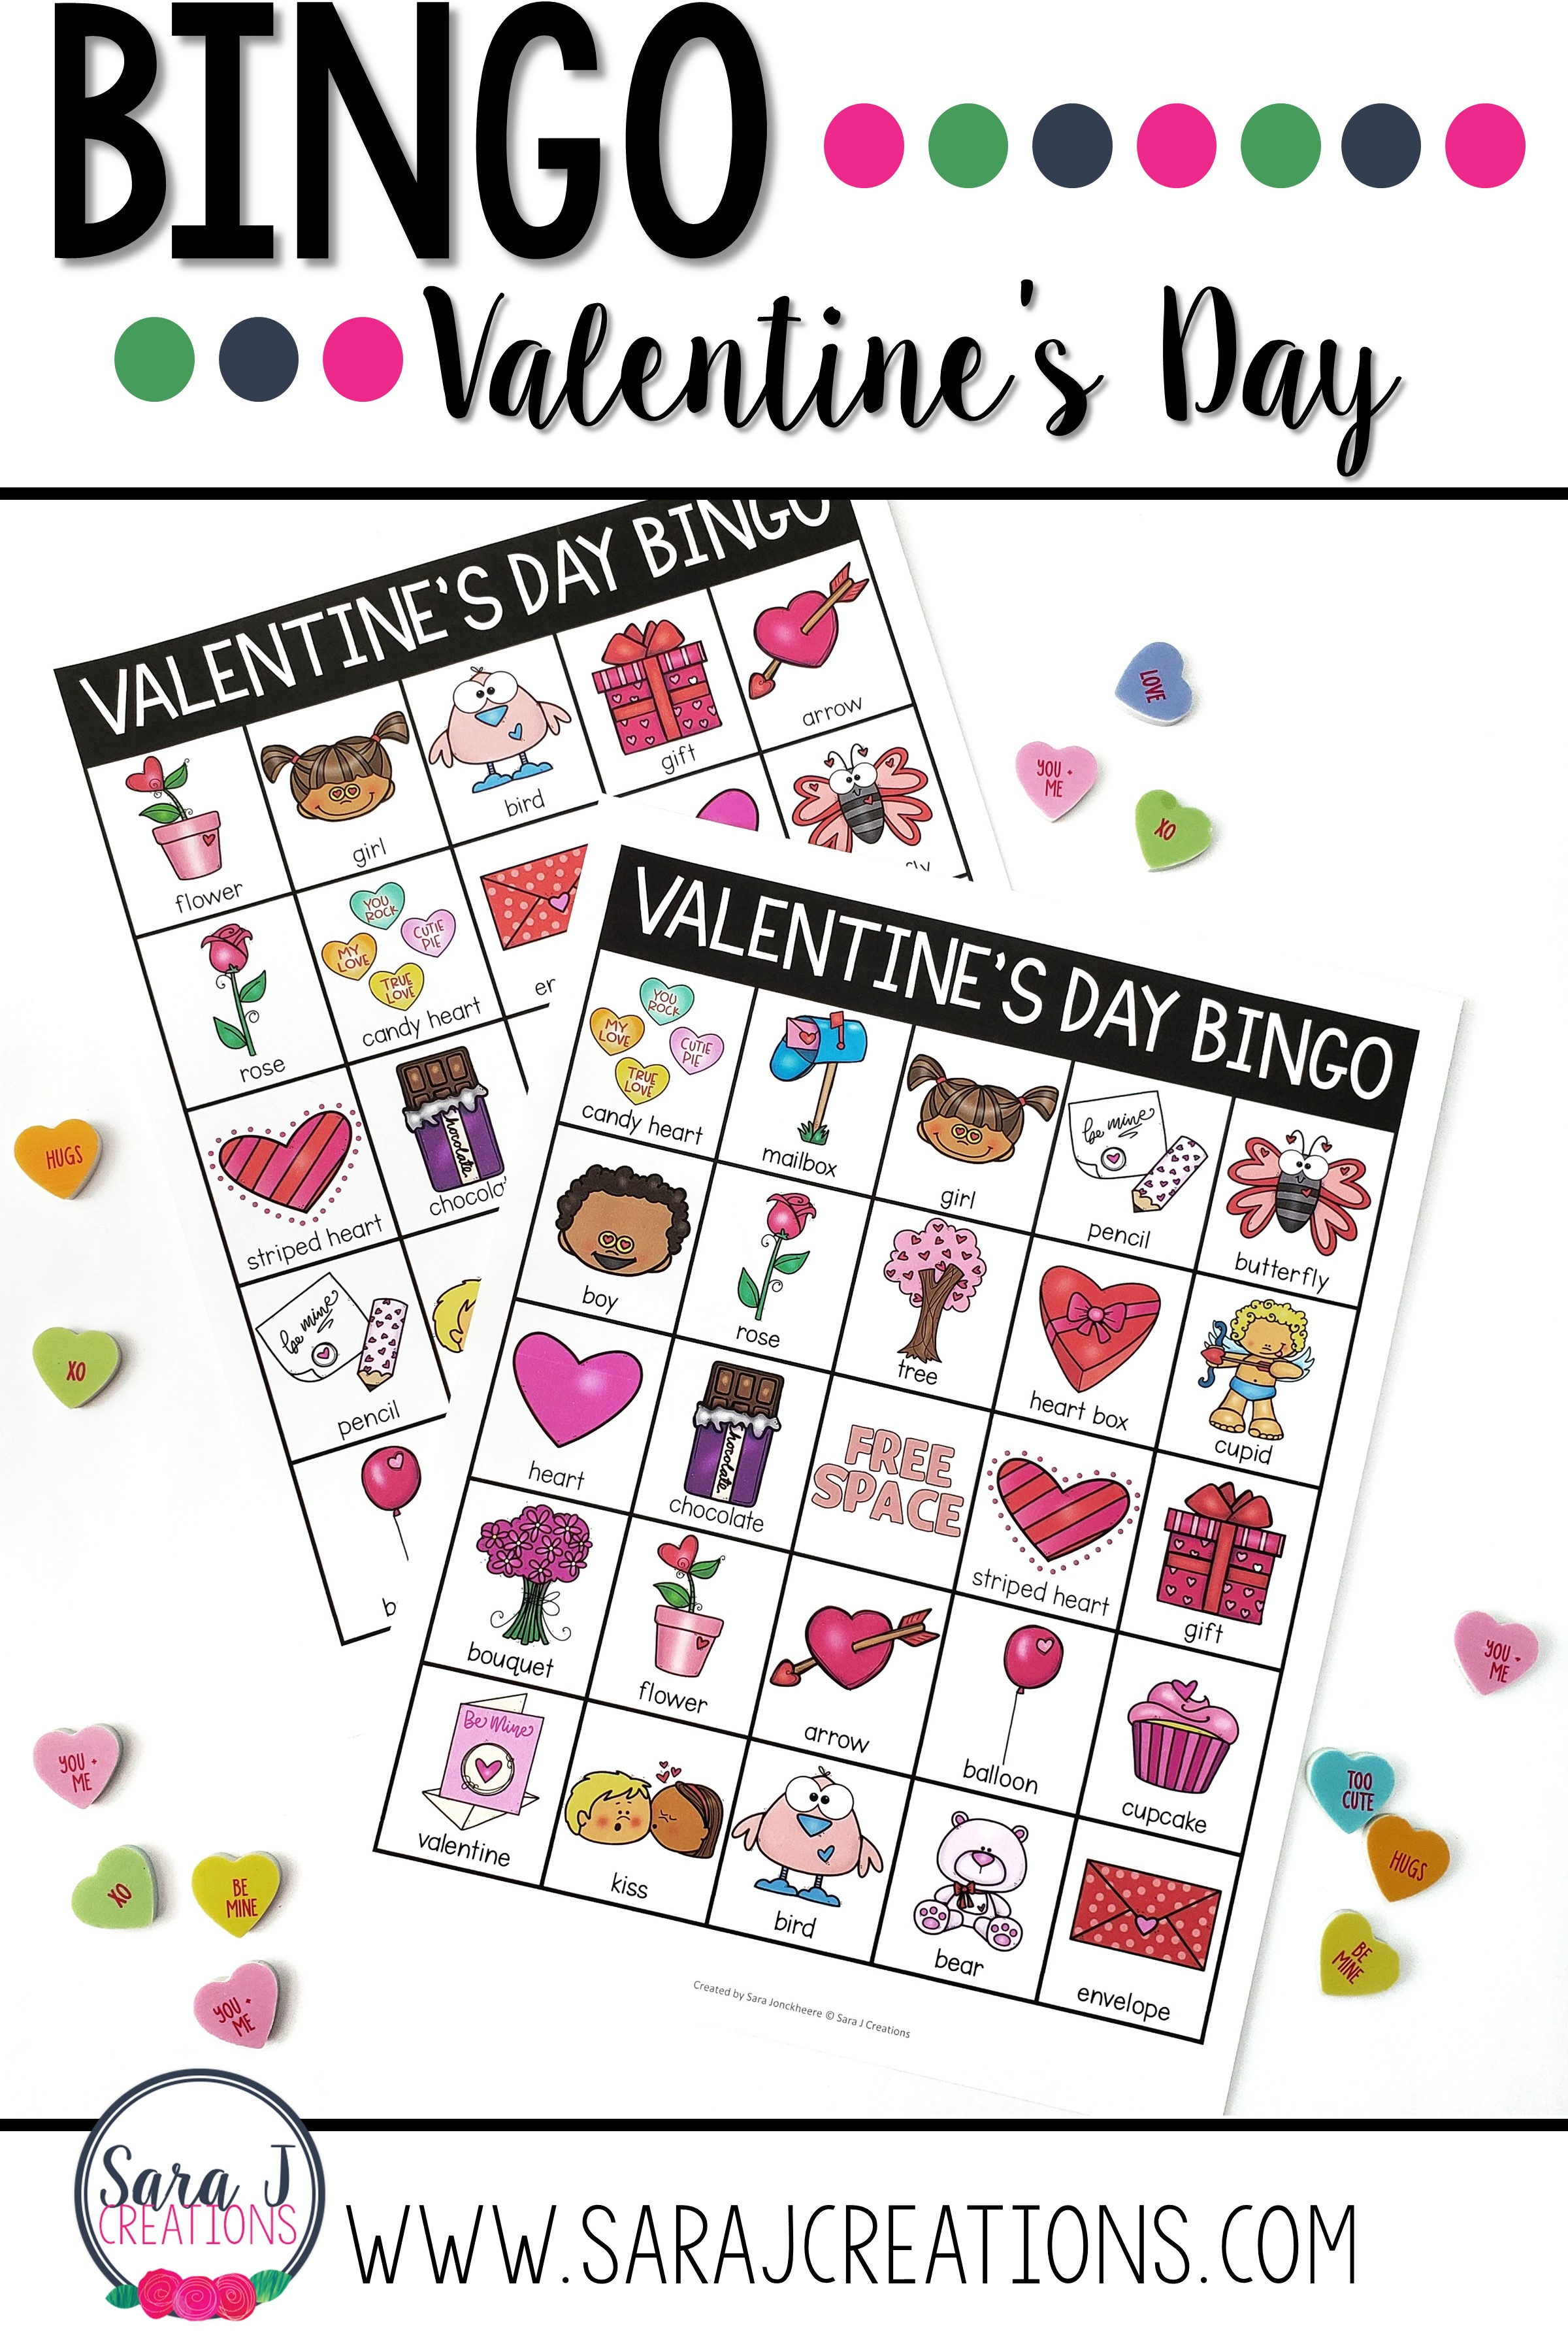 Valentine's Day Bingo is ideal for students to play at school parties.  It comes with 30 different boards so you can quickly print and play.